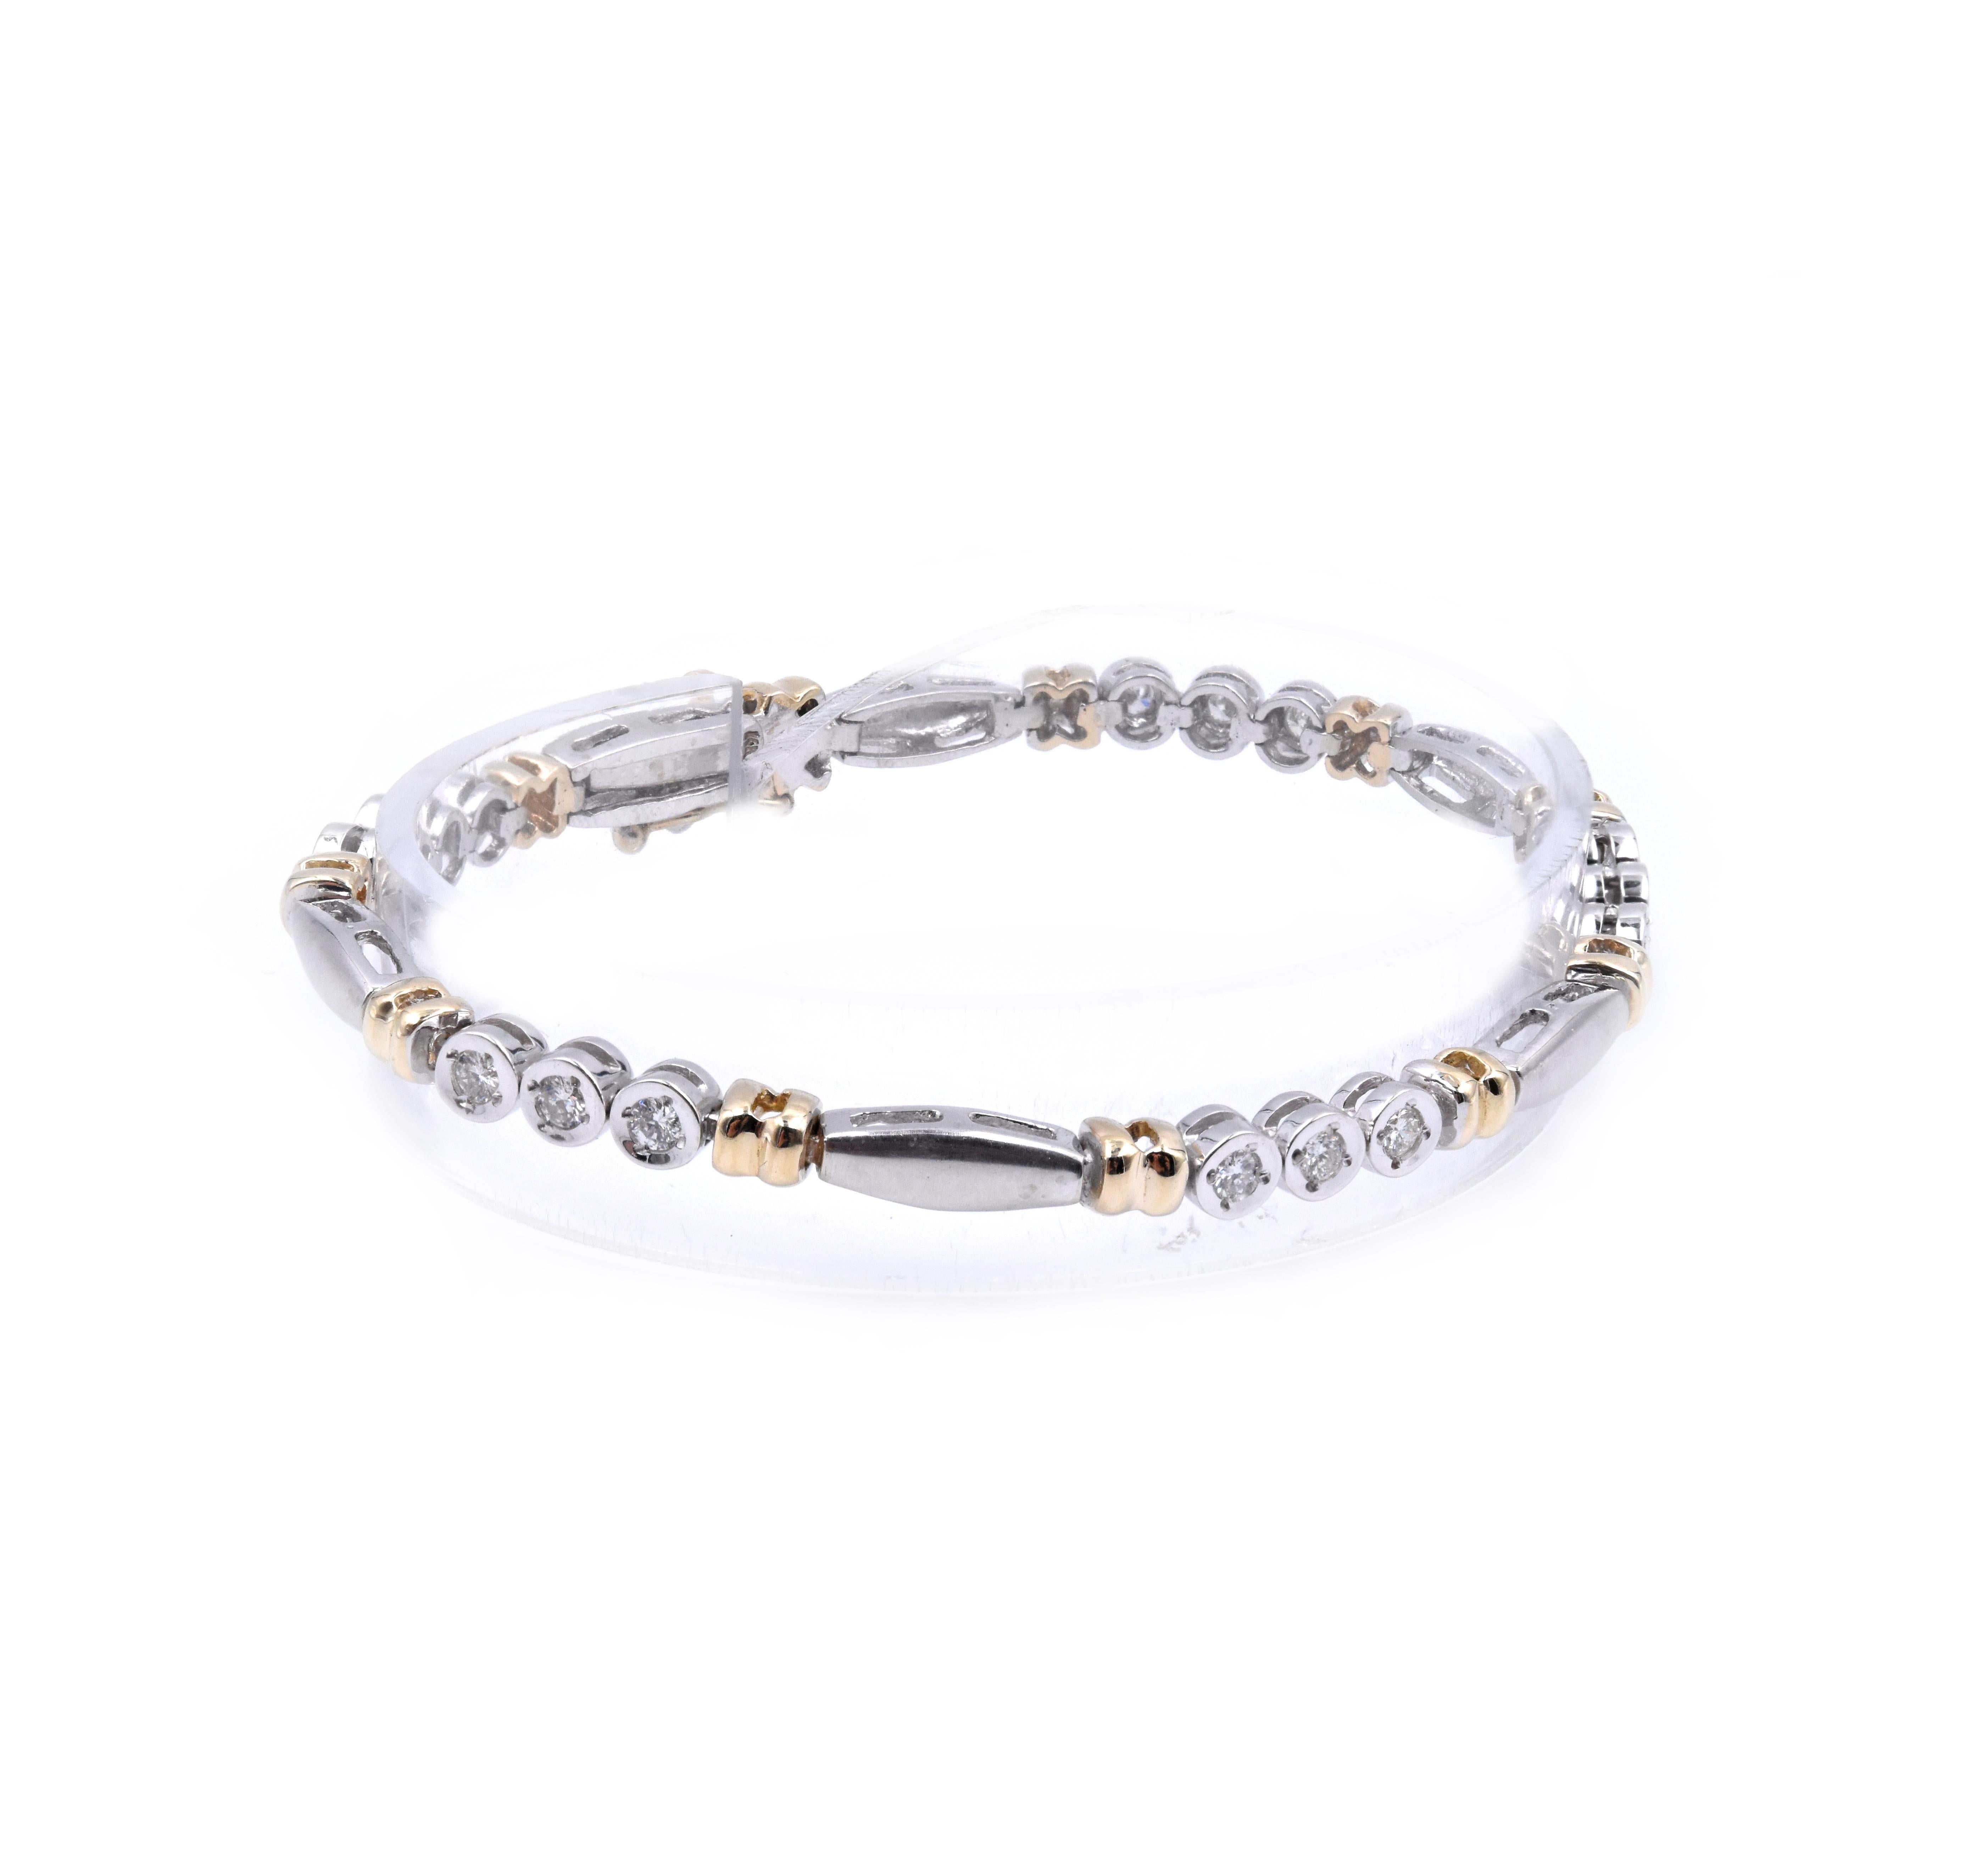 Material: 14K white and yellow gold
Diamonds: 15 round brilliant cut = .75cttw
Color: H
Clarity: SI1
Dimensions: bracelet will fit up to a 7-inch wrist
Weight: 13.06 grams
